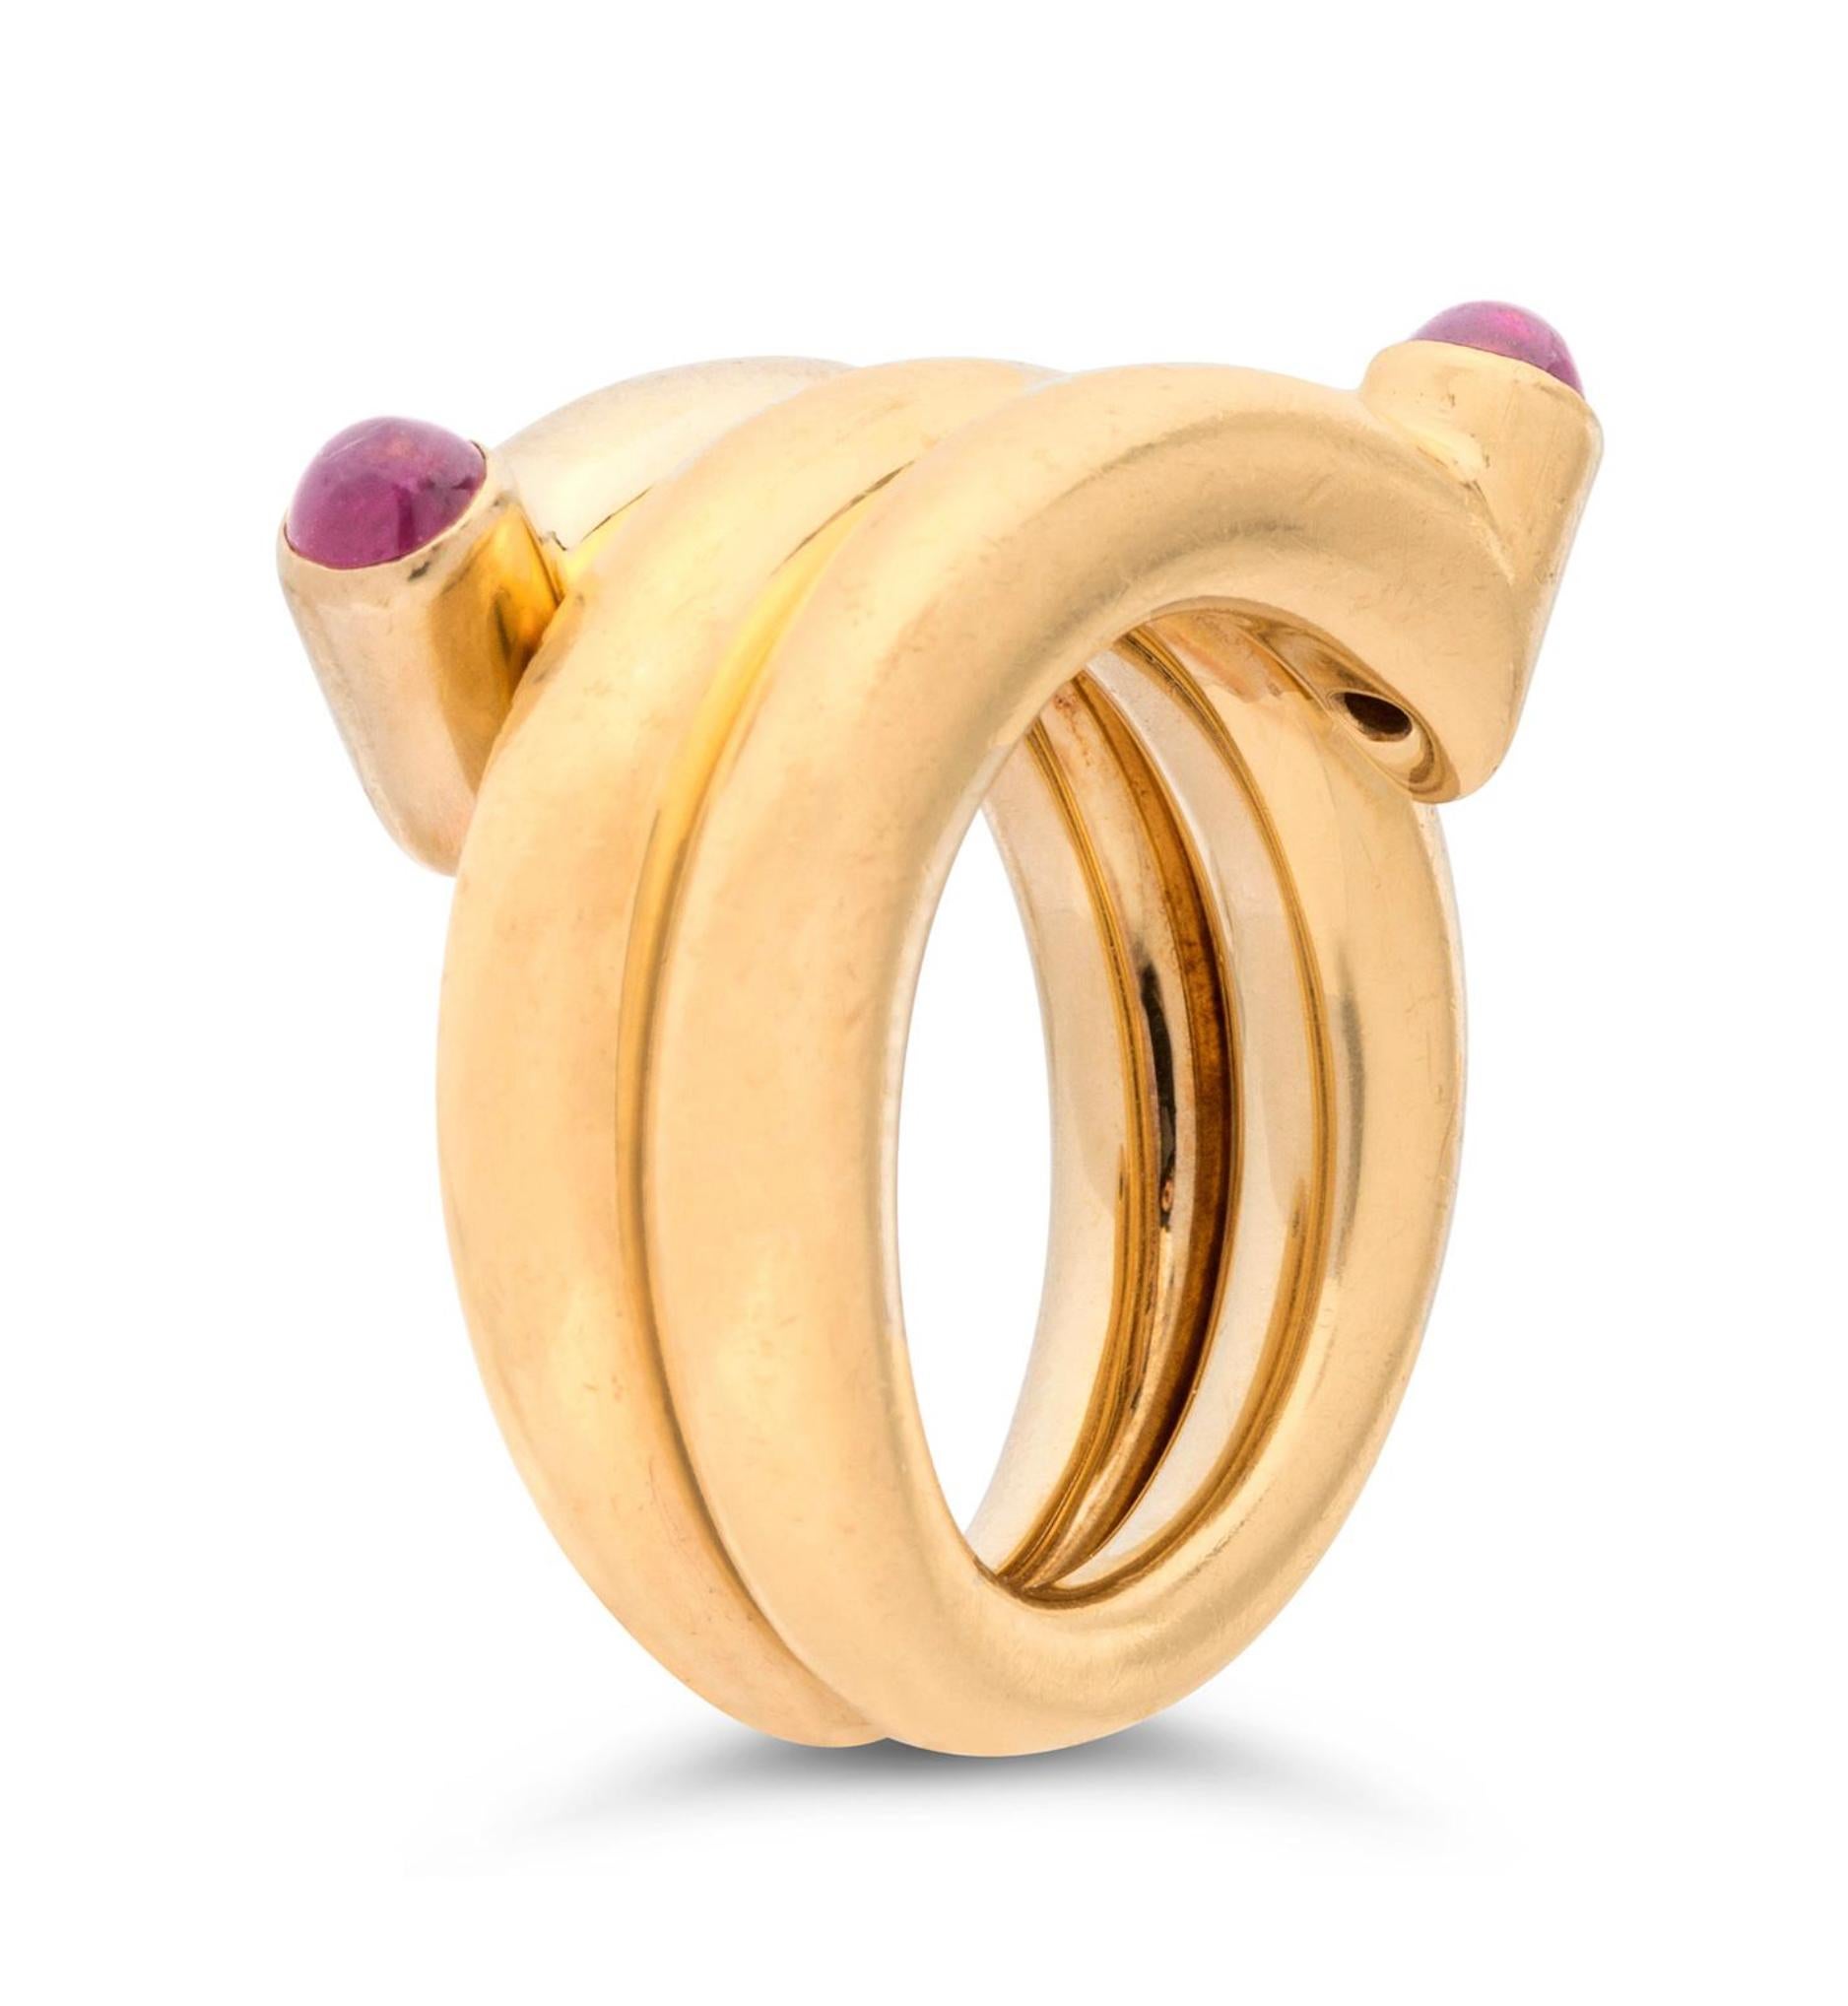 Post-War Tiffany & Co by Jean Schlumberger New York, 18K & Ruby Double Coil Ring, C.1960